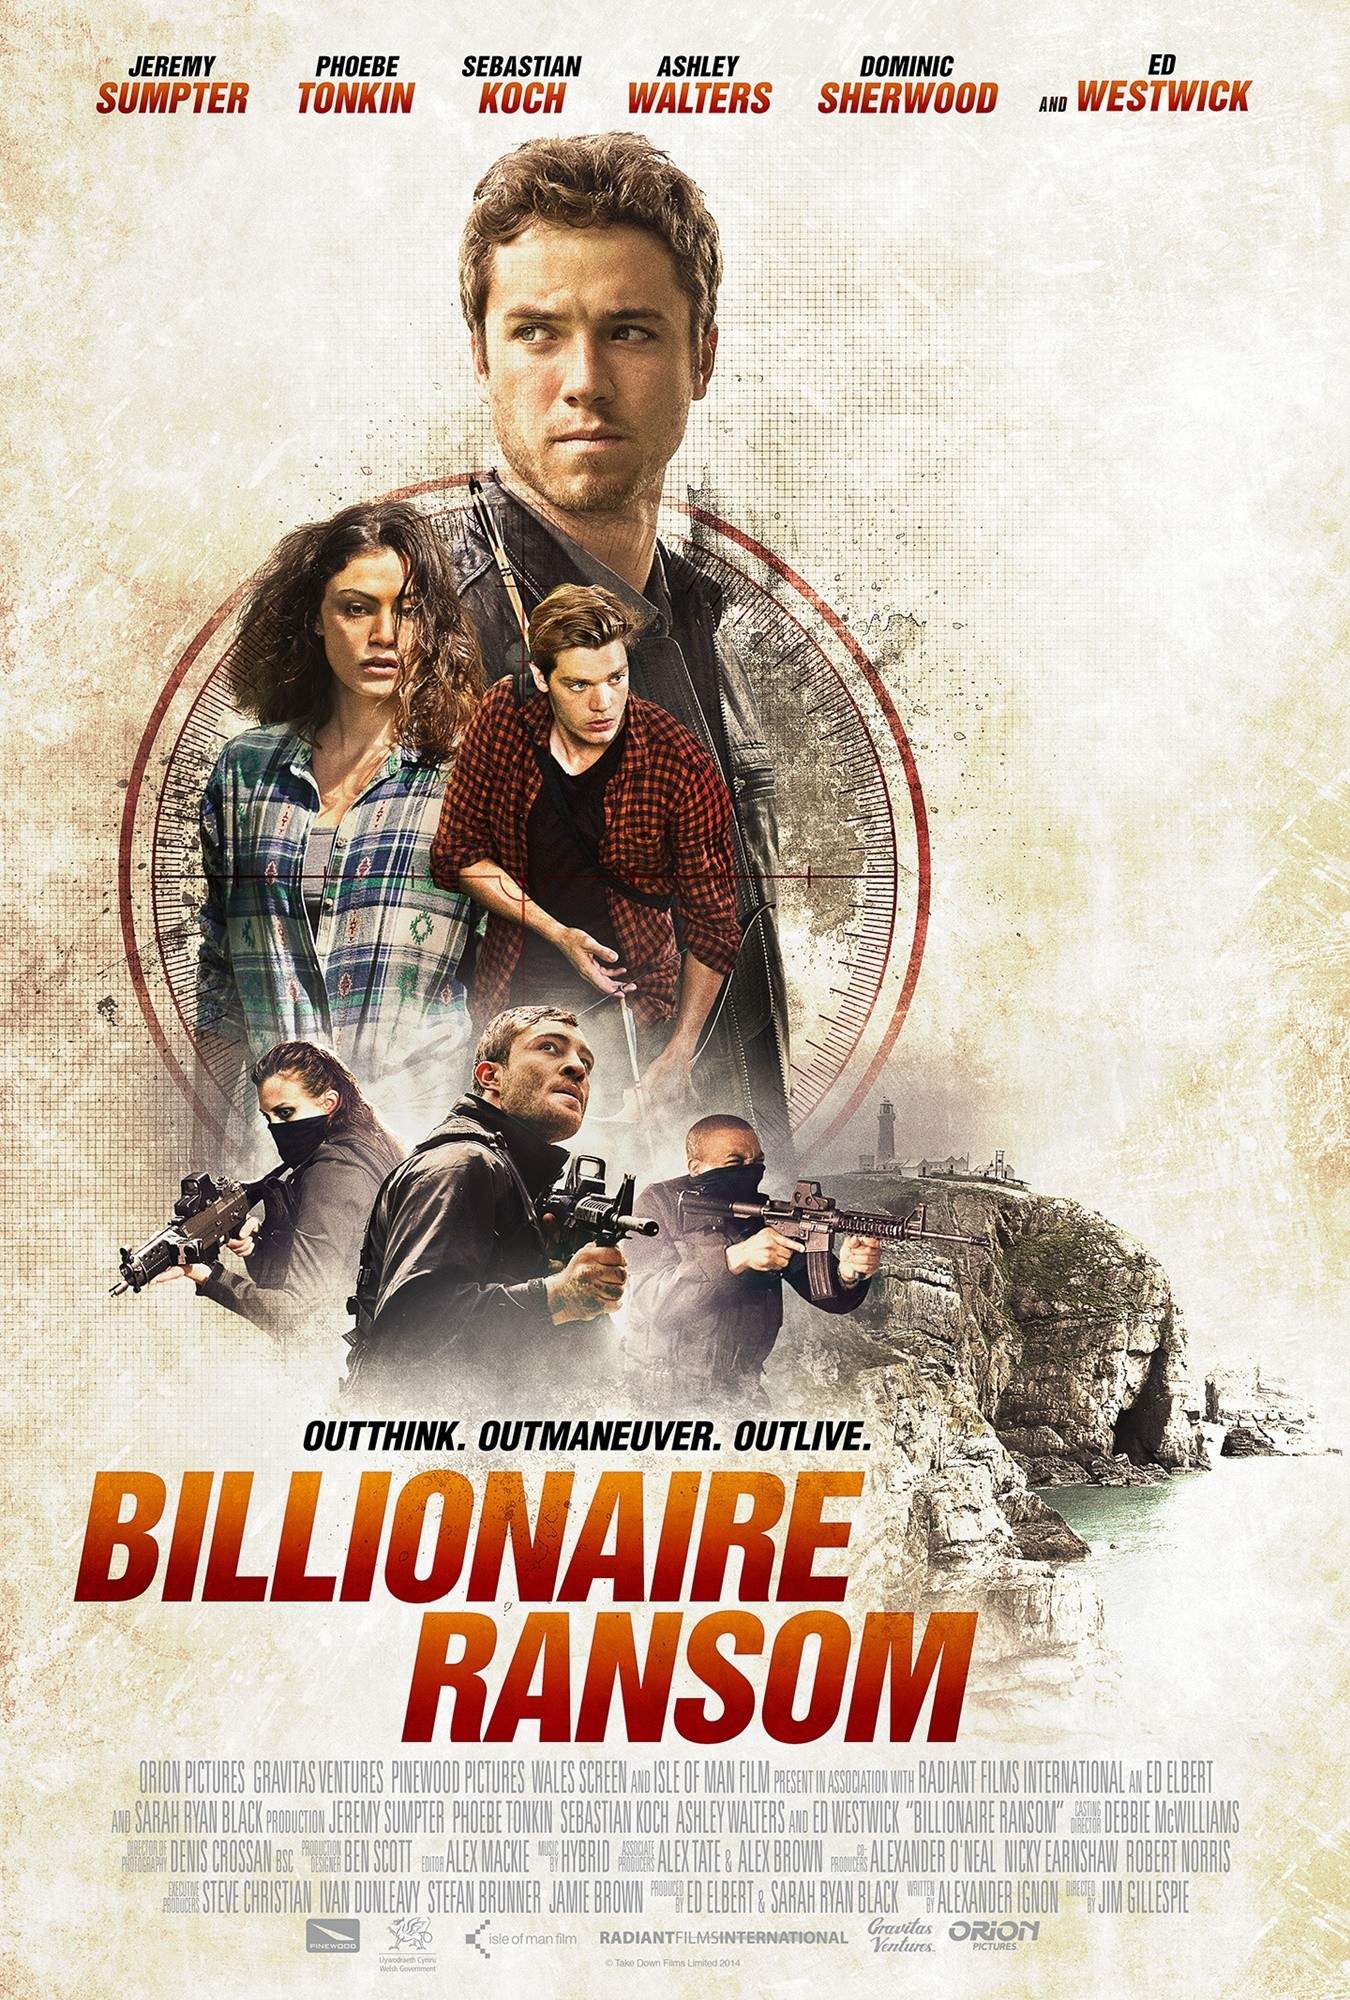 Billionaire Ransom (2016) Pictures, Trailer, Reviews, News, DVD and Soundtrack1350 x 2000